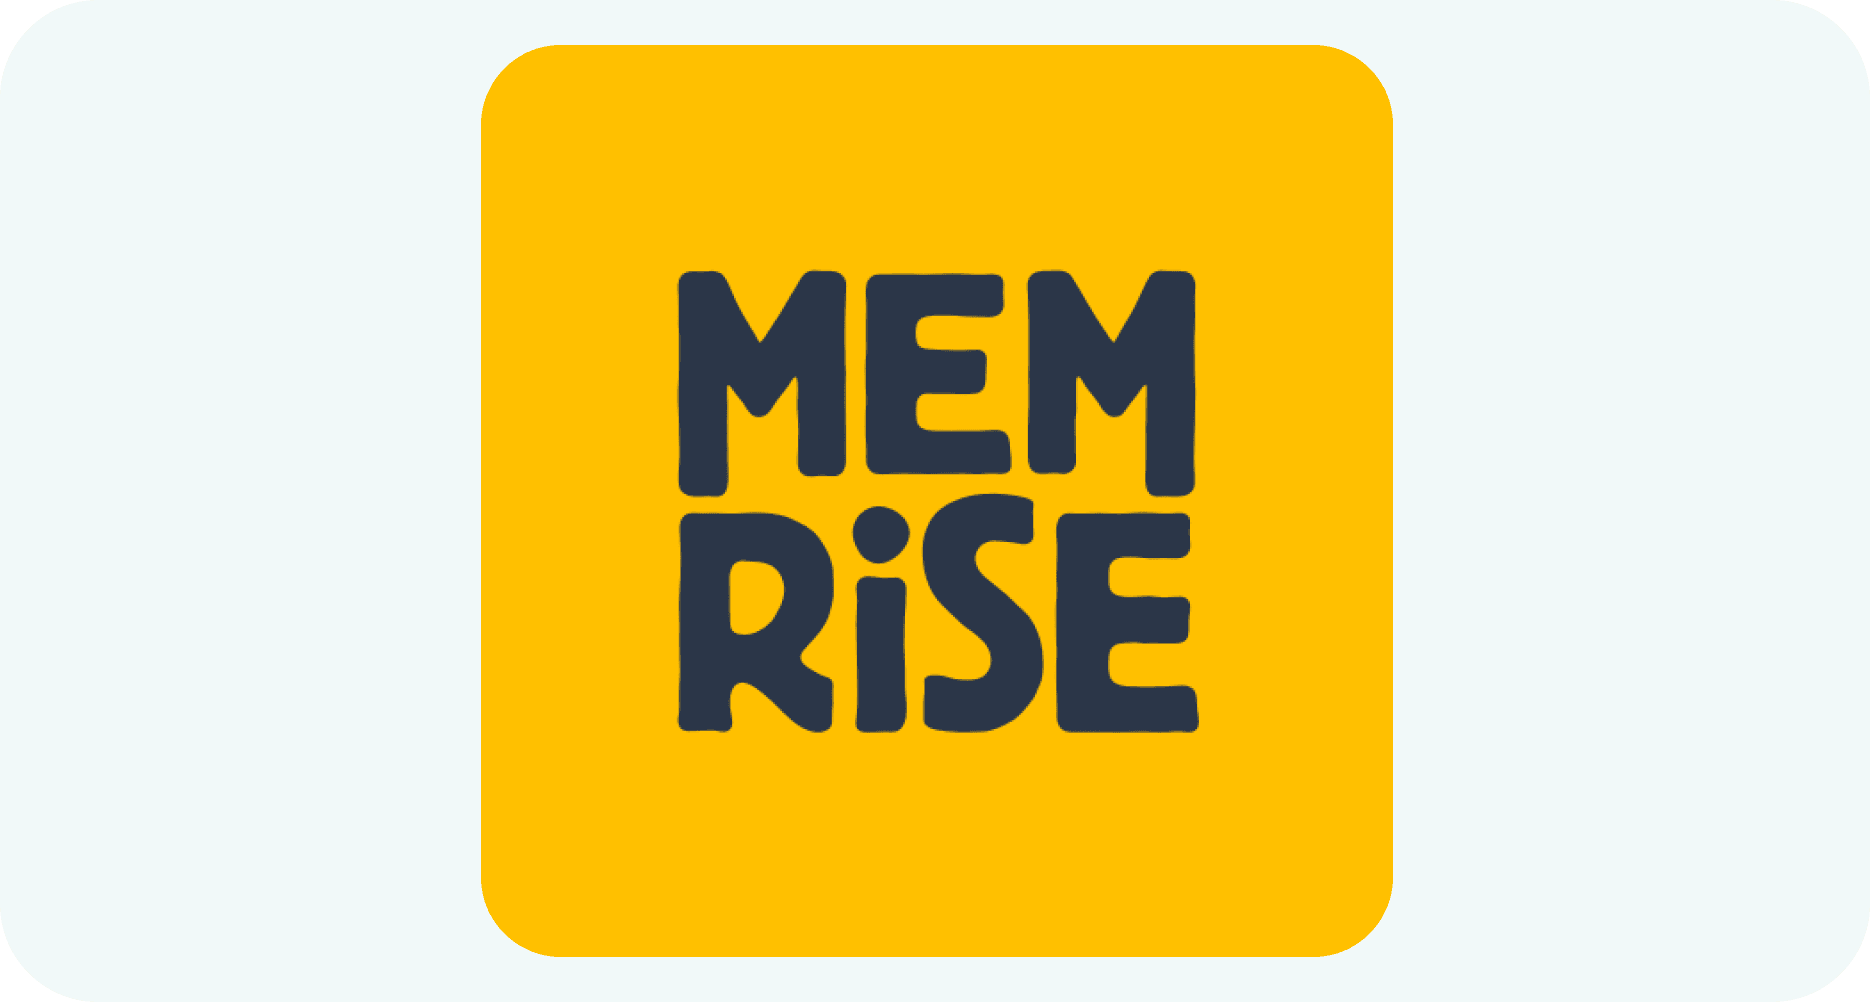 Memrise Logo as an App that features Spaced Repetition